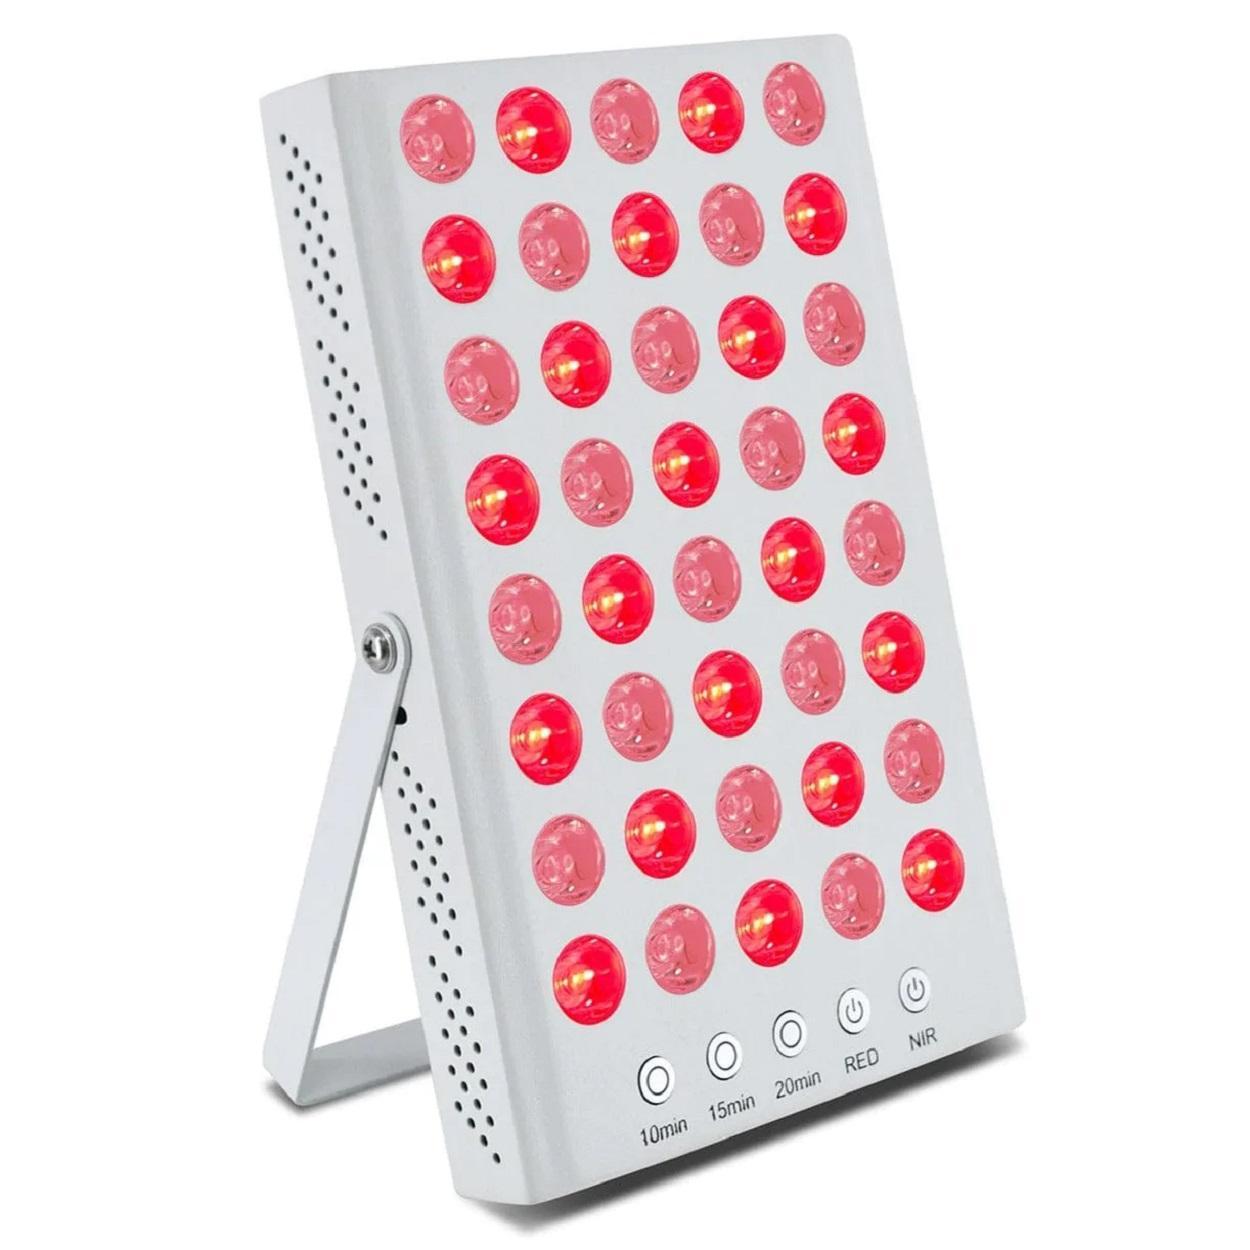 Why is Red Light Therapy So Expensive?